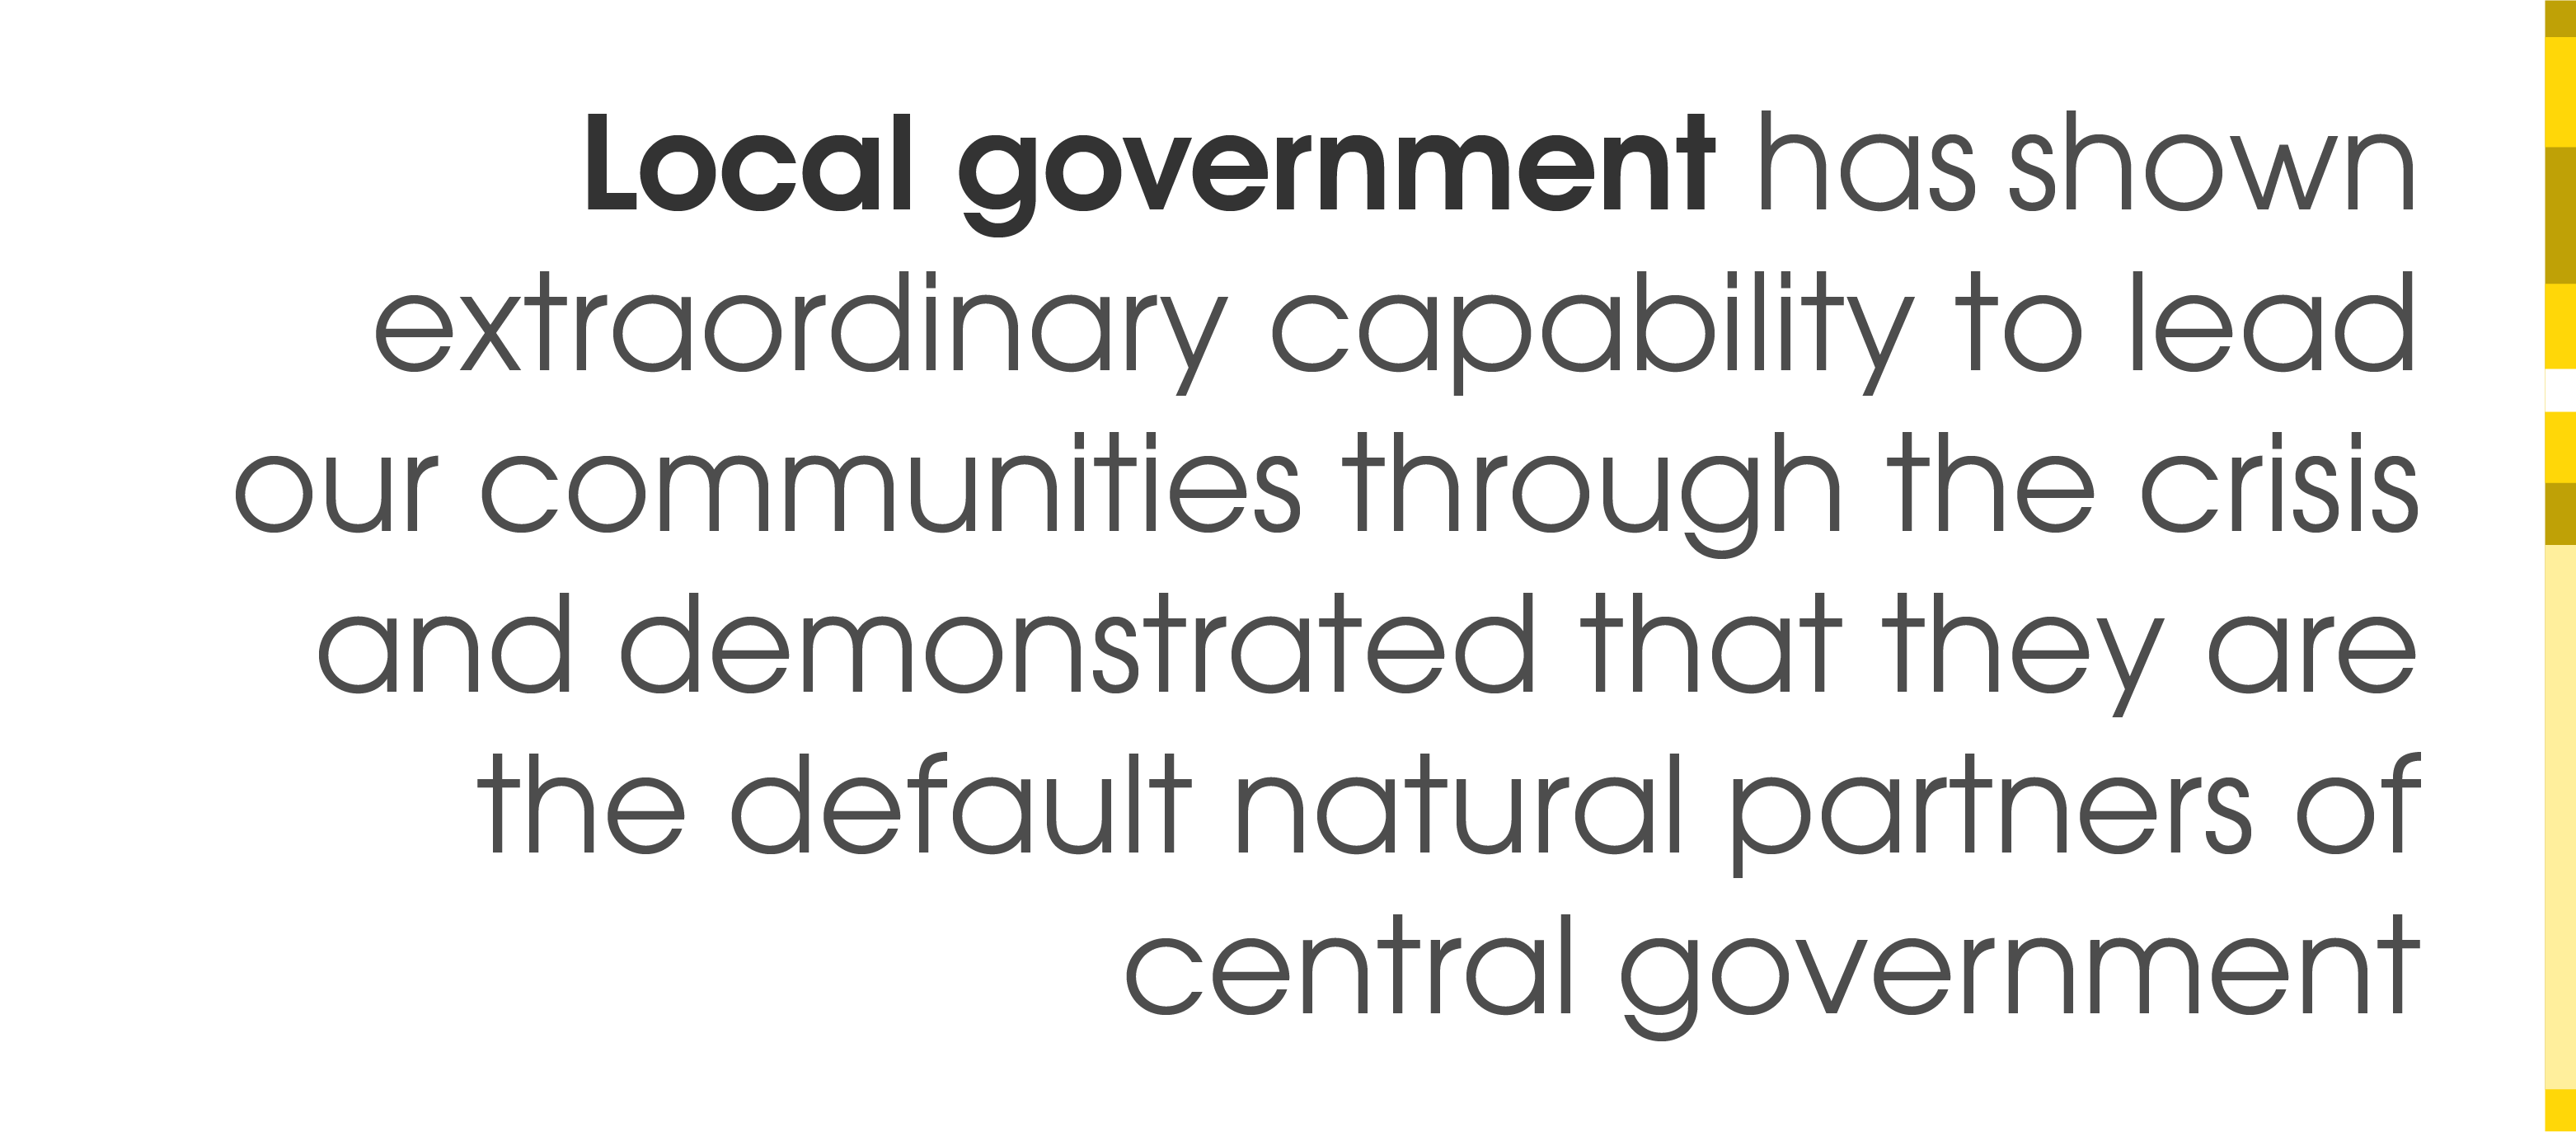 Local government has shown extraordinary capability to lead our communities through the crisis and demonstrated that they are the default natural partners of central government.